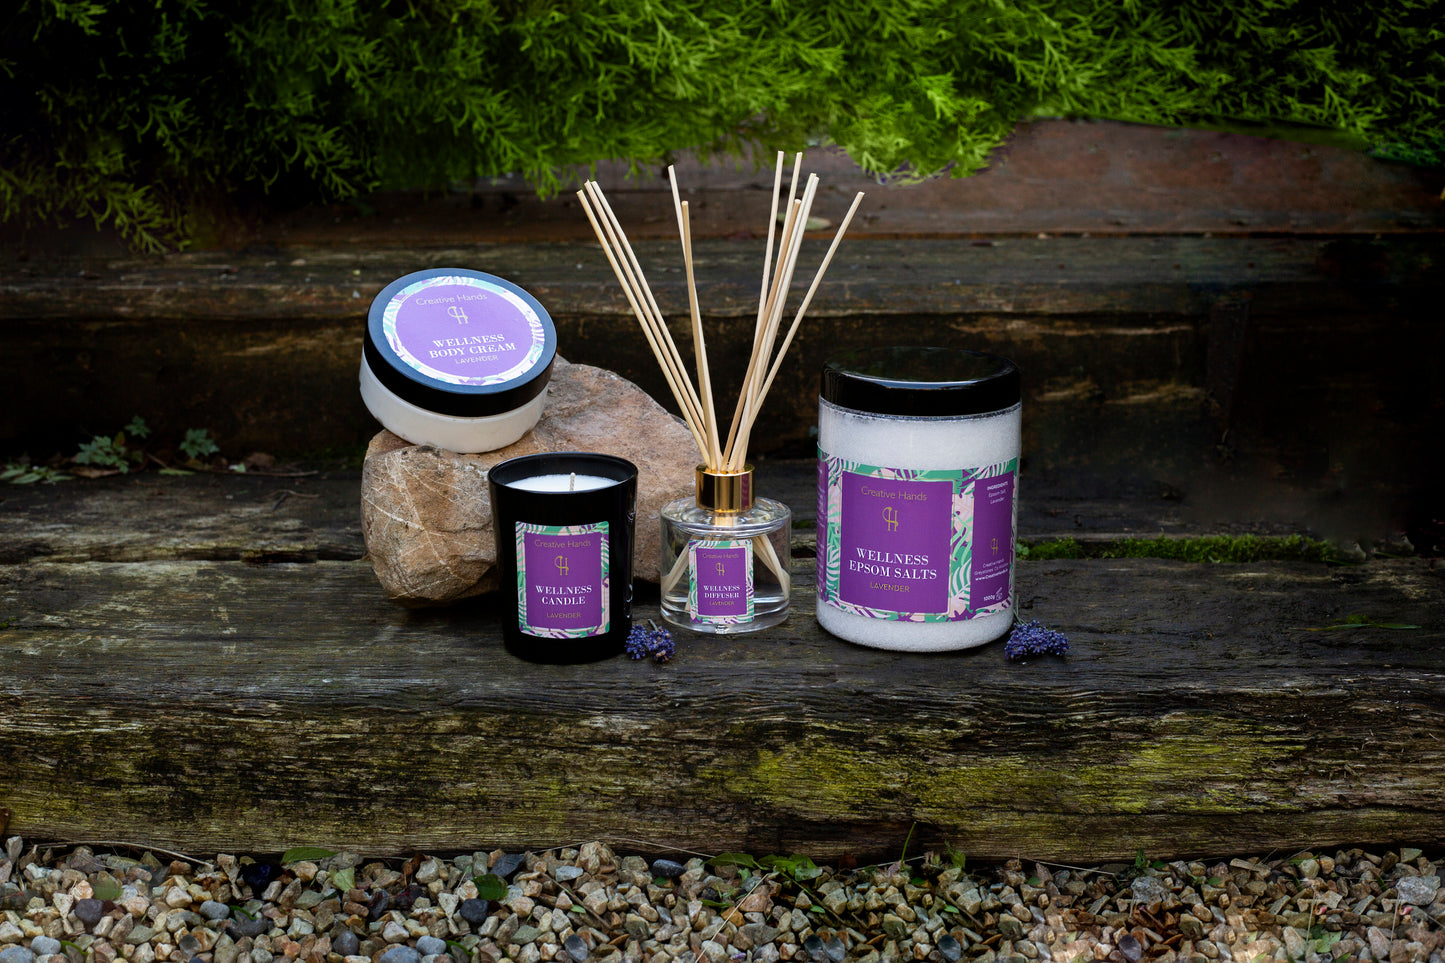 Lavender Wellness Collection